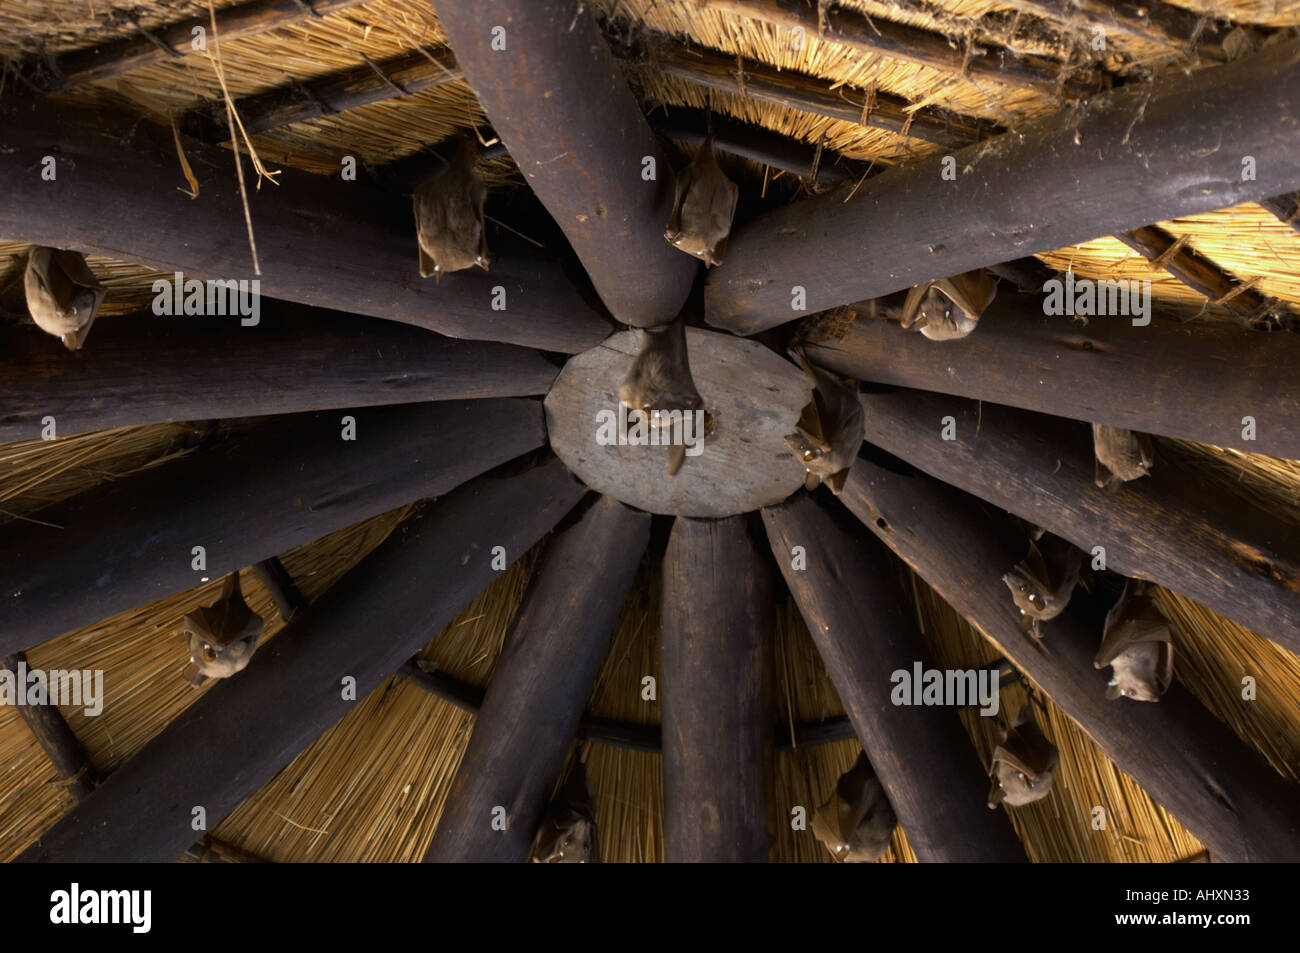 Bats in the roof of a thatched roof in Kruger National Park Stock Photo